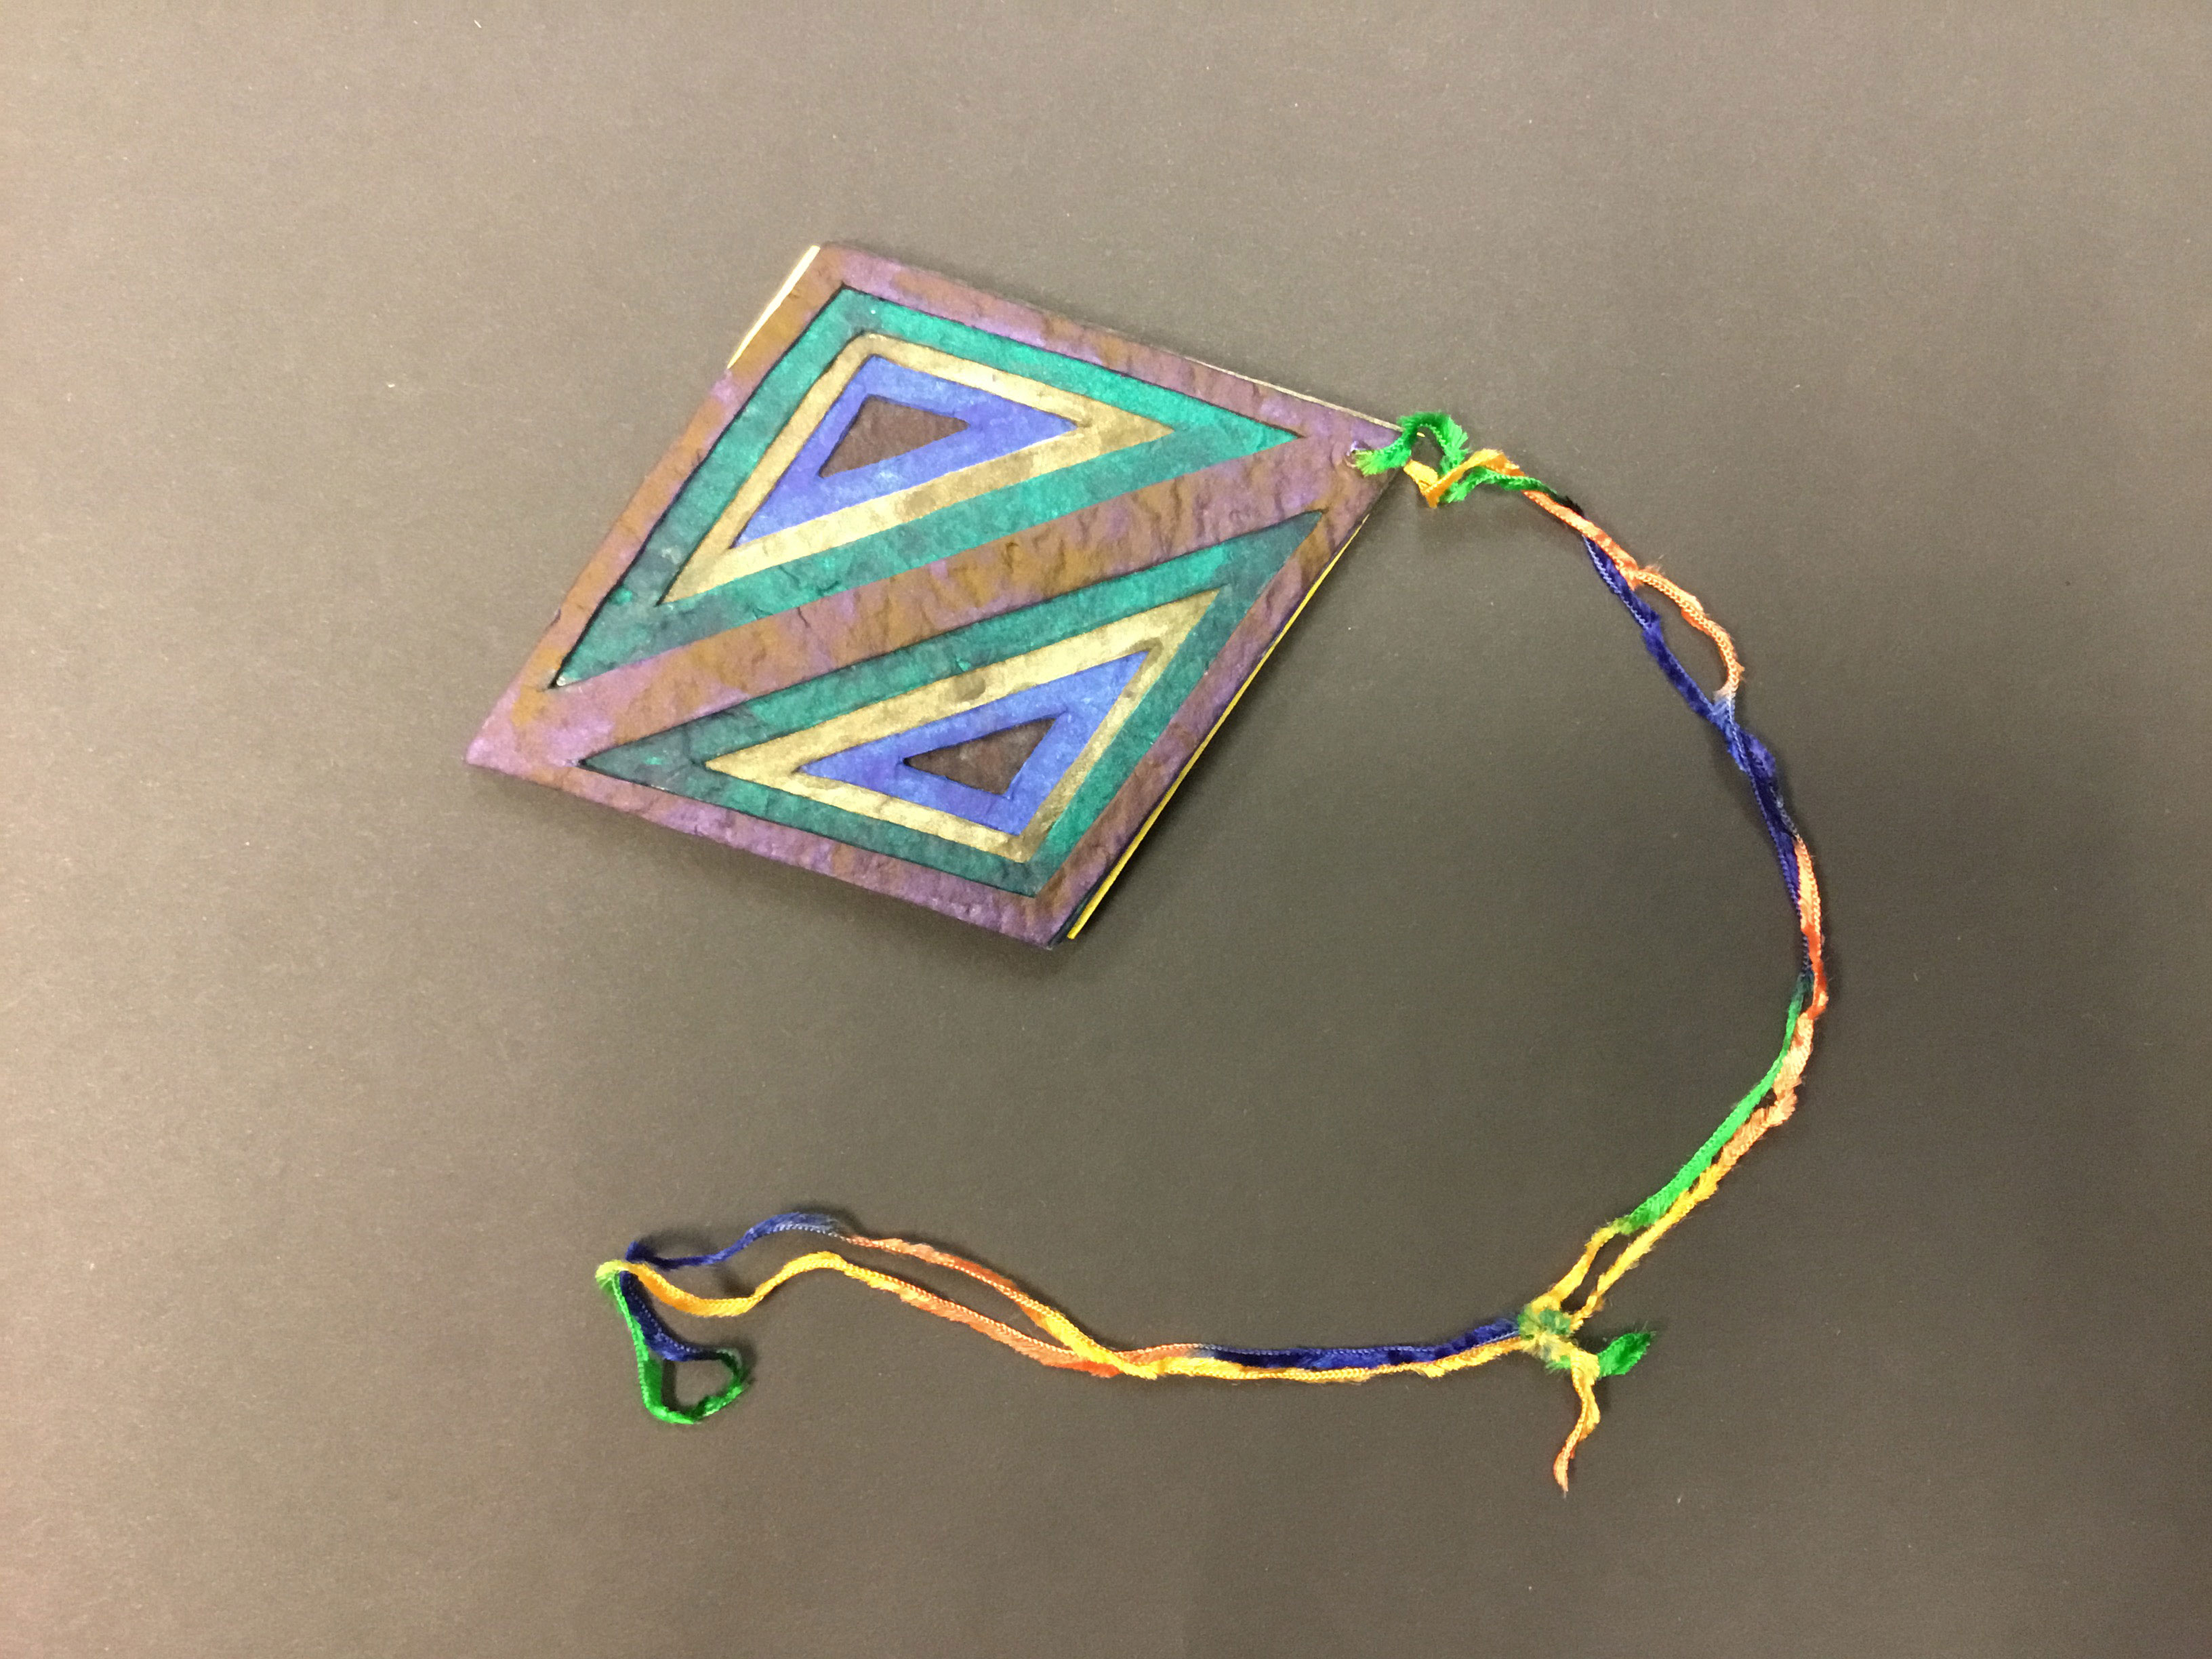 This diamond-shaped piece is made from multiple layers of handmade recycled paper, handmade natural dyes, and watercolors. The front of the piece is made up of two triangles facing each other, with each layer being either navy, green, yellow, blue, and black. The back is the same pattern, but the layers are instead bright yellow, speckled blue, burnt umber, green, and orange. There is a loop of Lana Grossa yarn in a hole on the right.